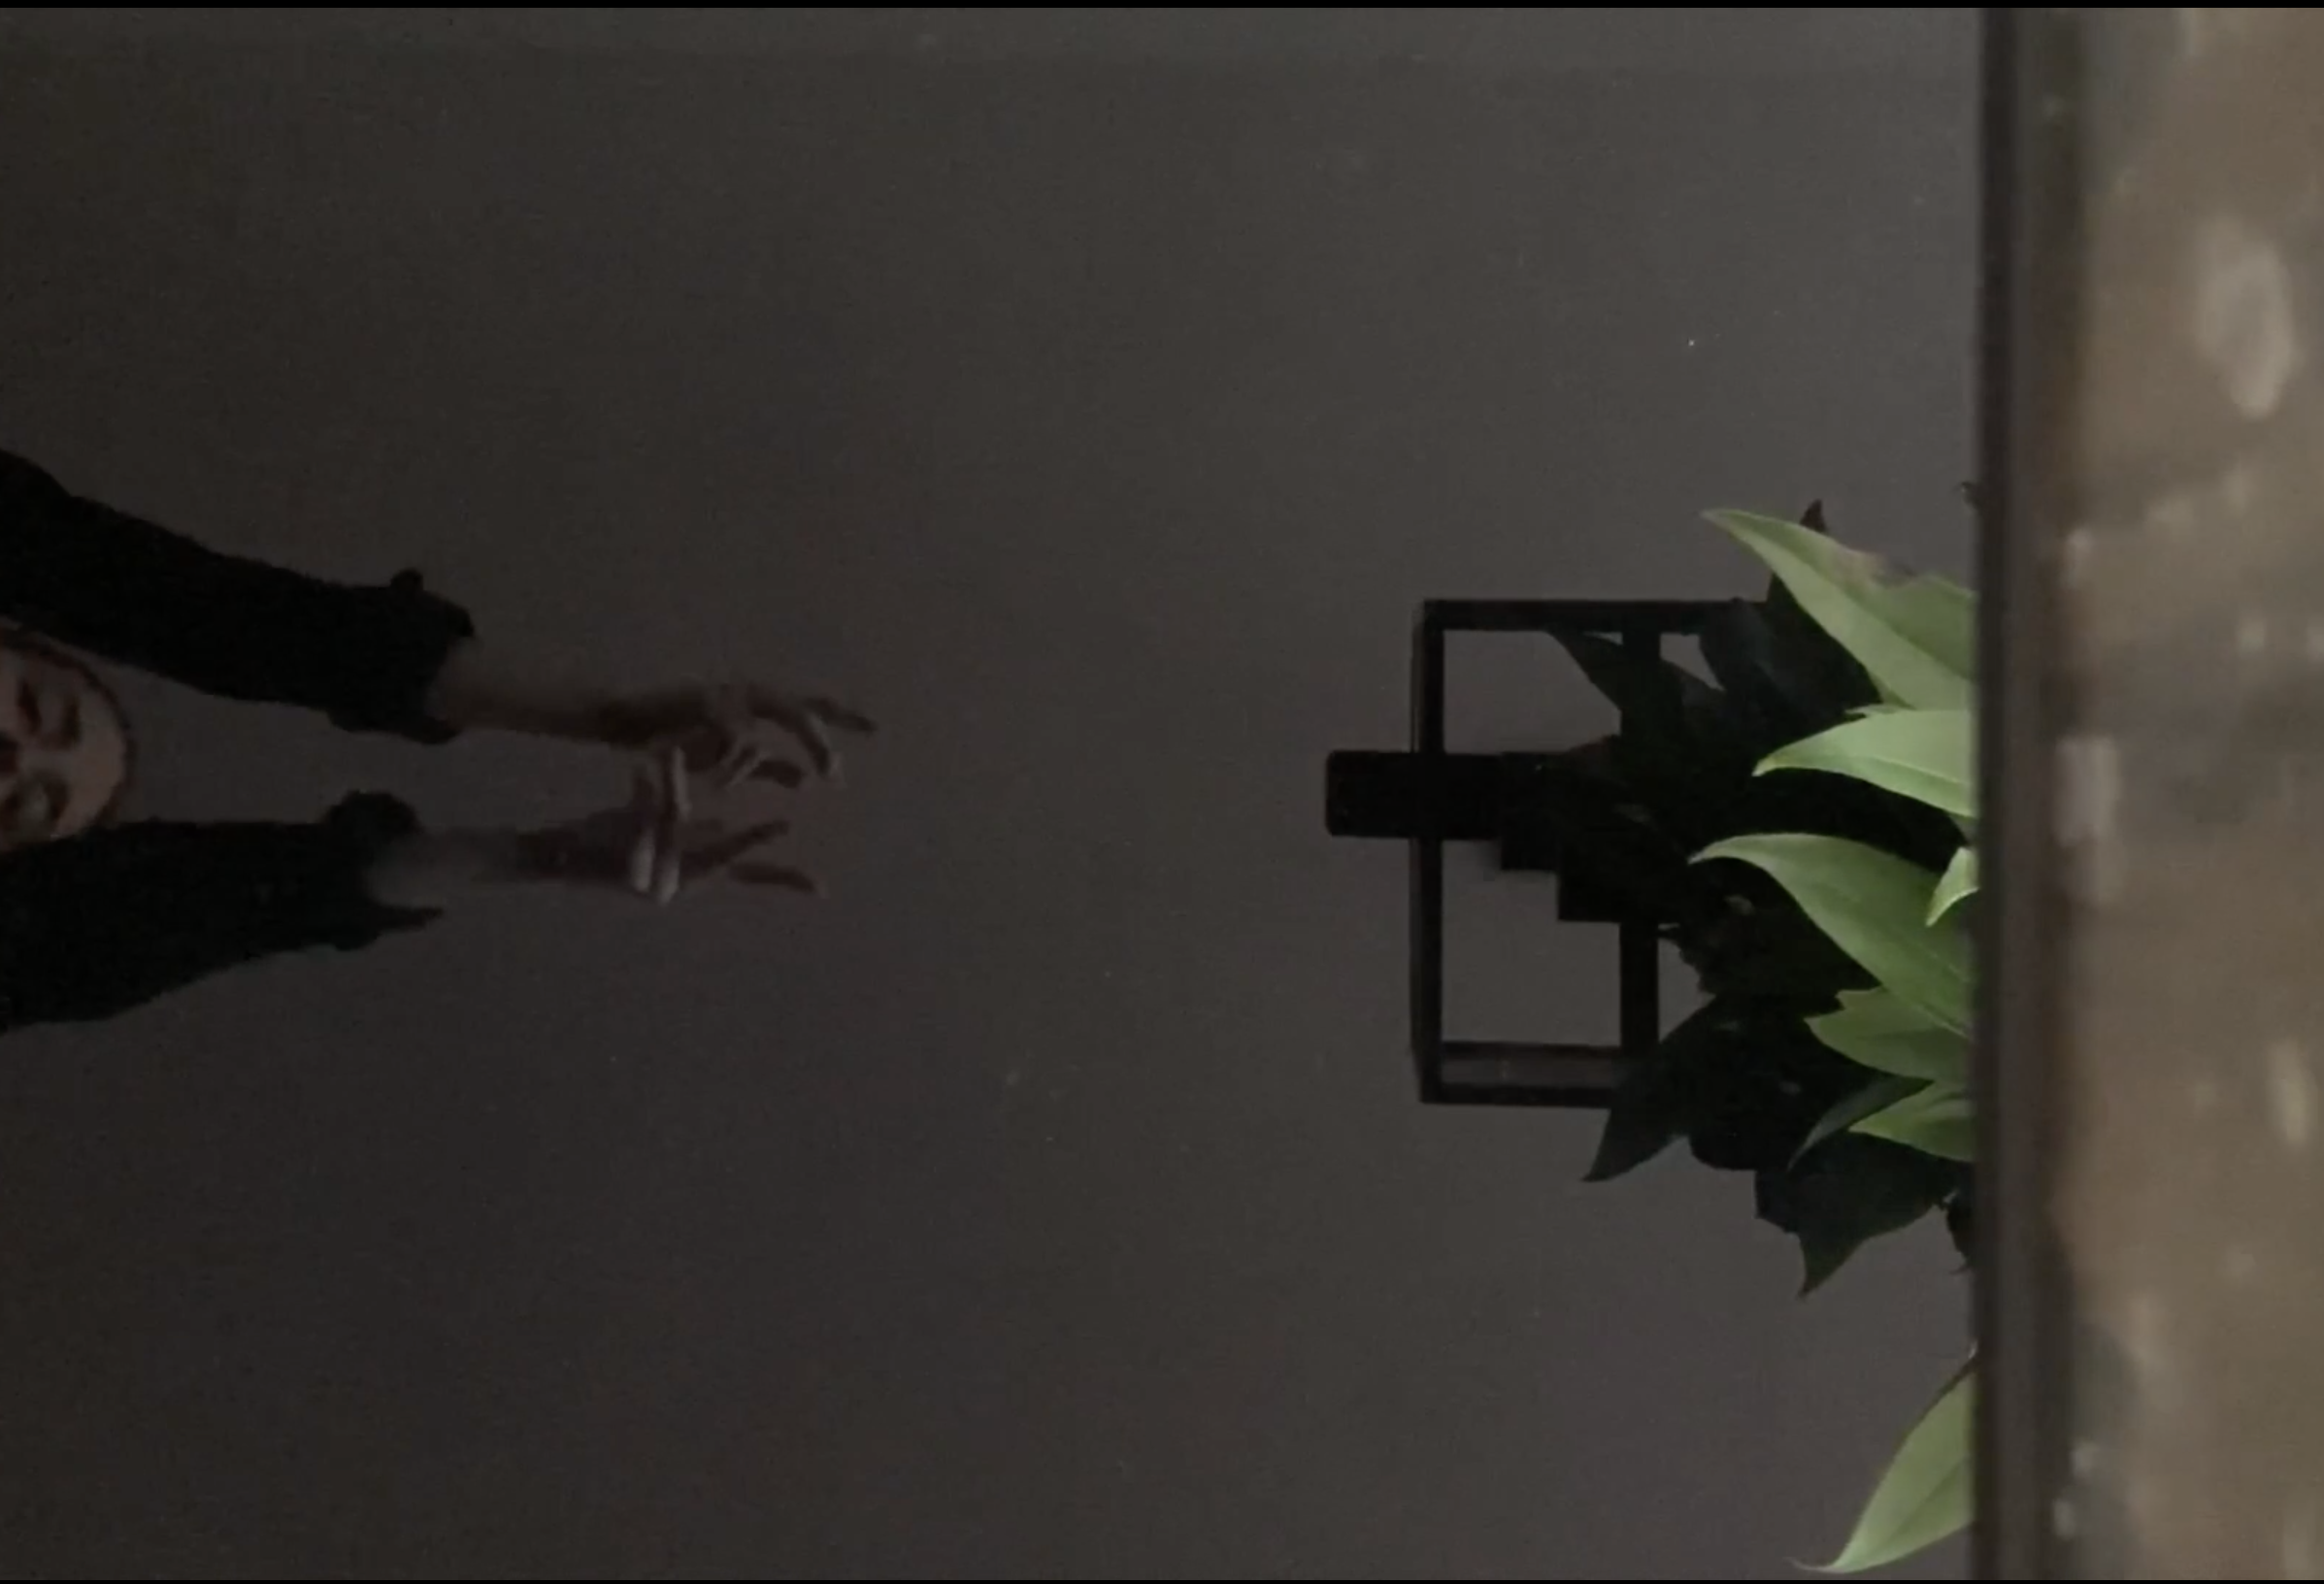 A dancer's head and arms extend out of the left side of the image, while on the right side, a plant extends from a solid structure. The room is dark and the dancer wears black sleeves. Credit is as follows: Time Enough: Clock: January 2021 (Crystal of Time), created by Allison Costa.